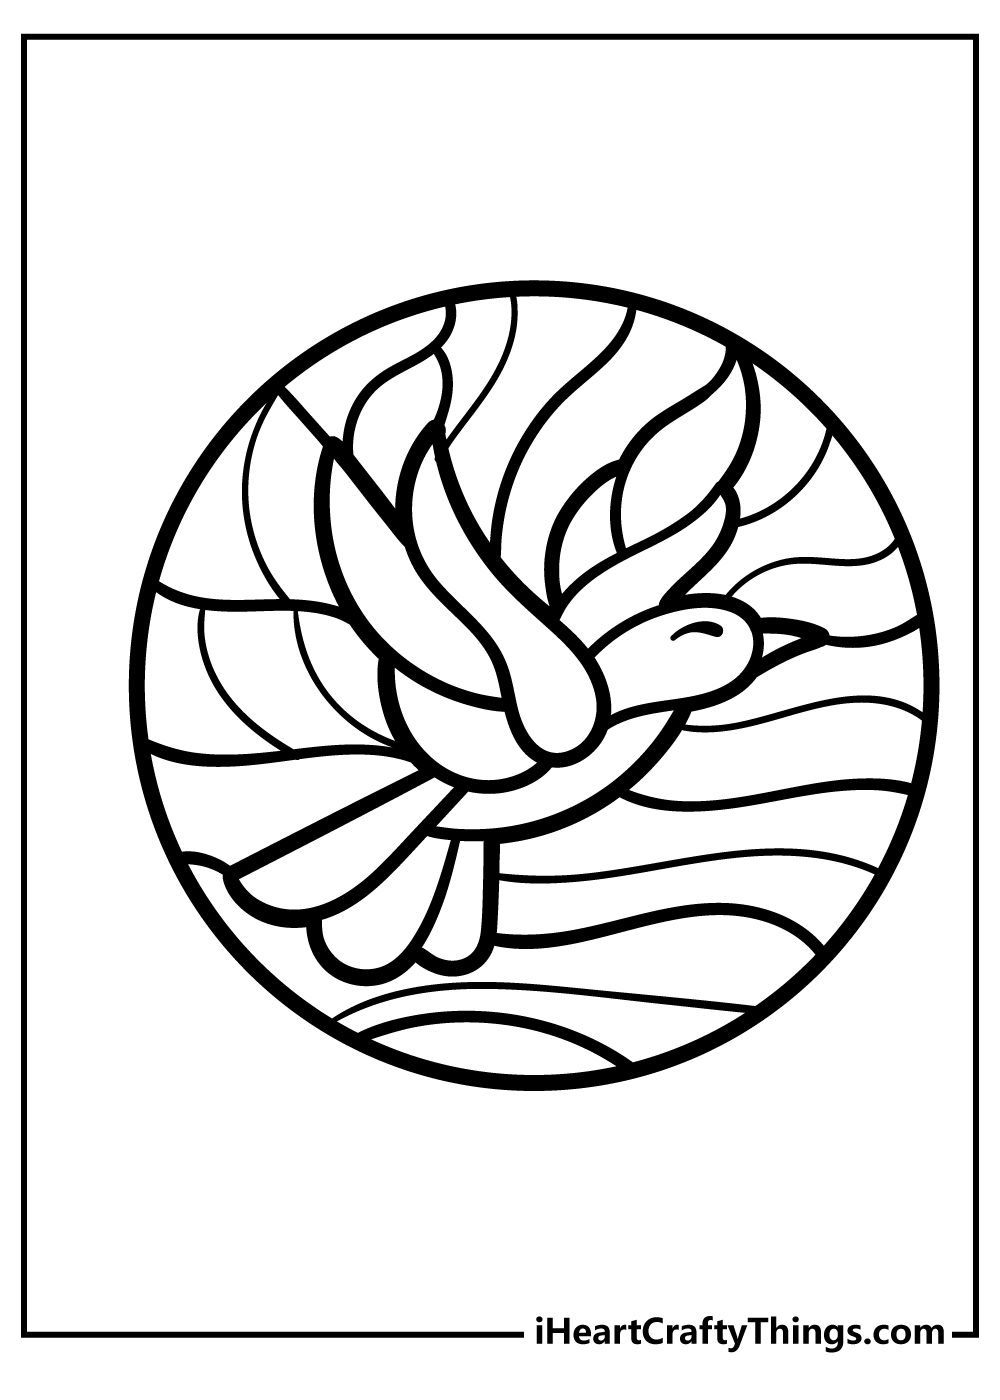 Stained Glass Coloring Sheet for children free download